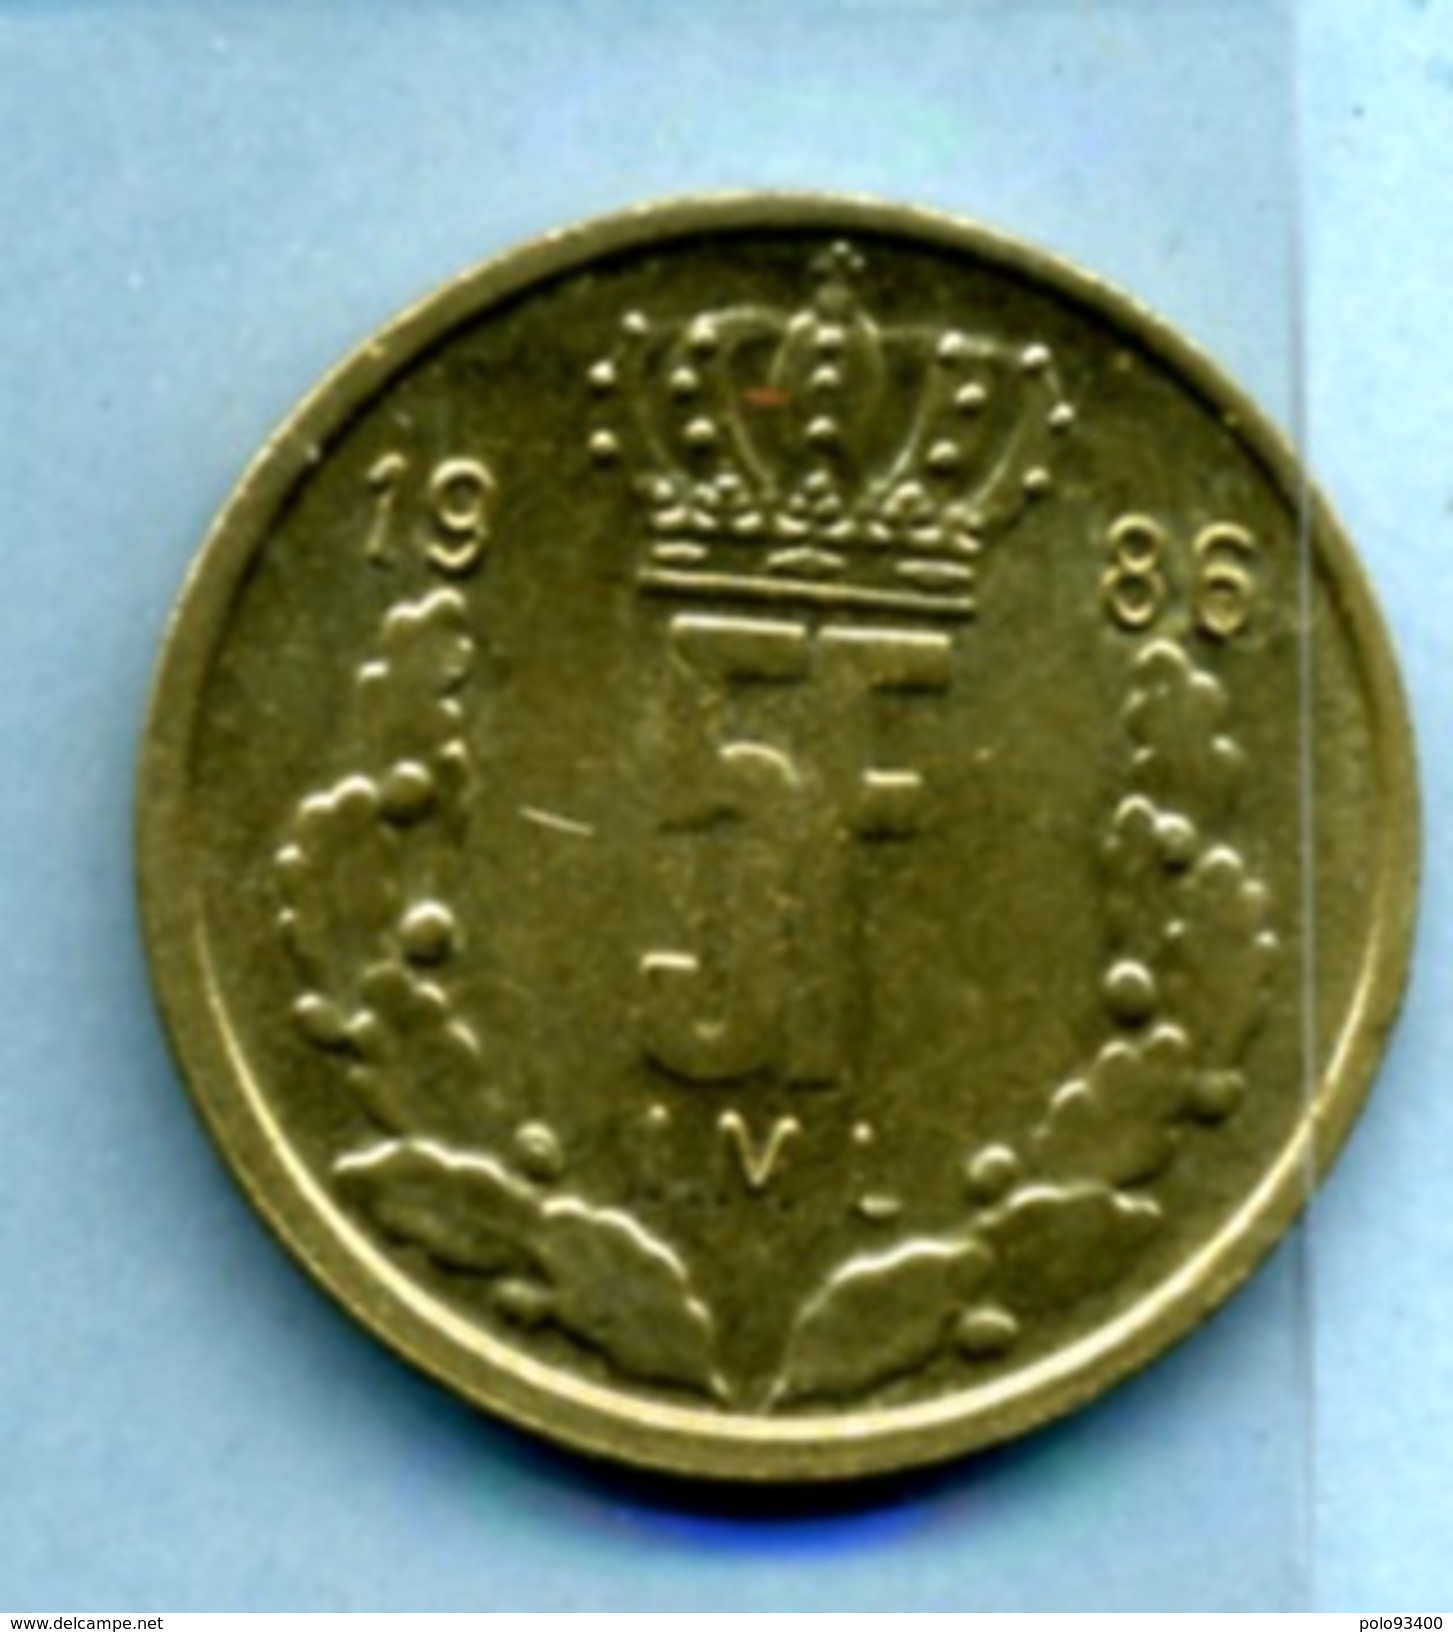 1986 5 Francs - Luxembourg